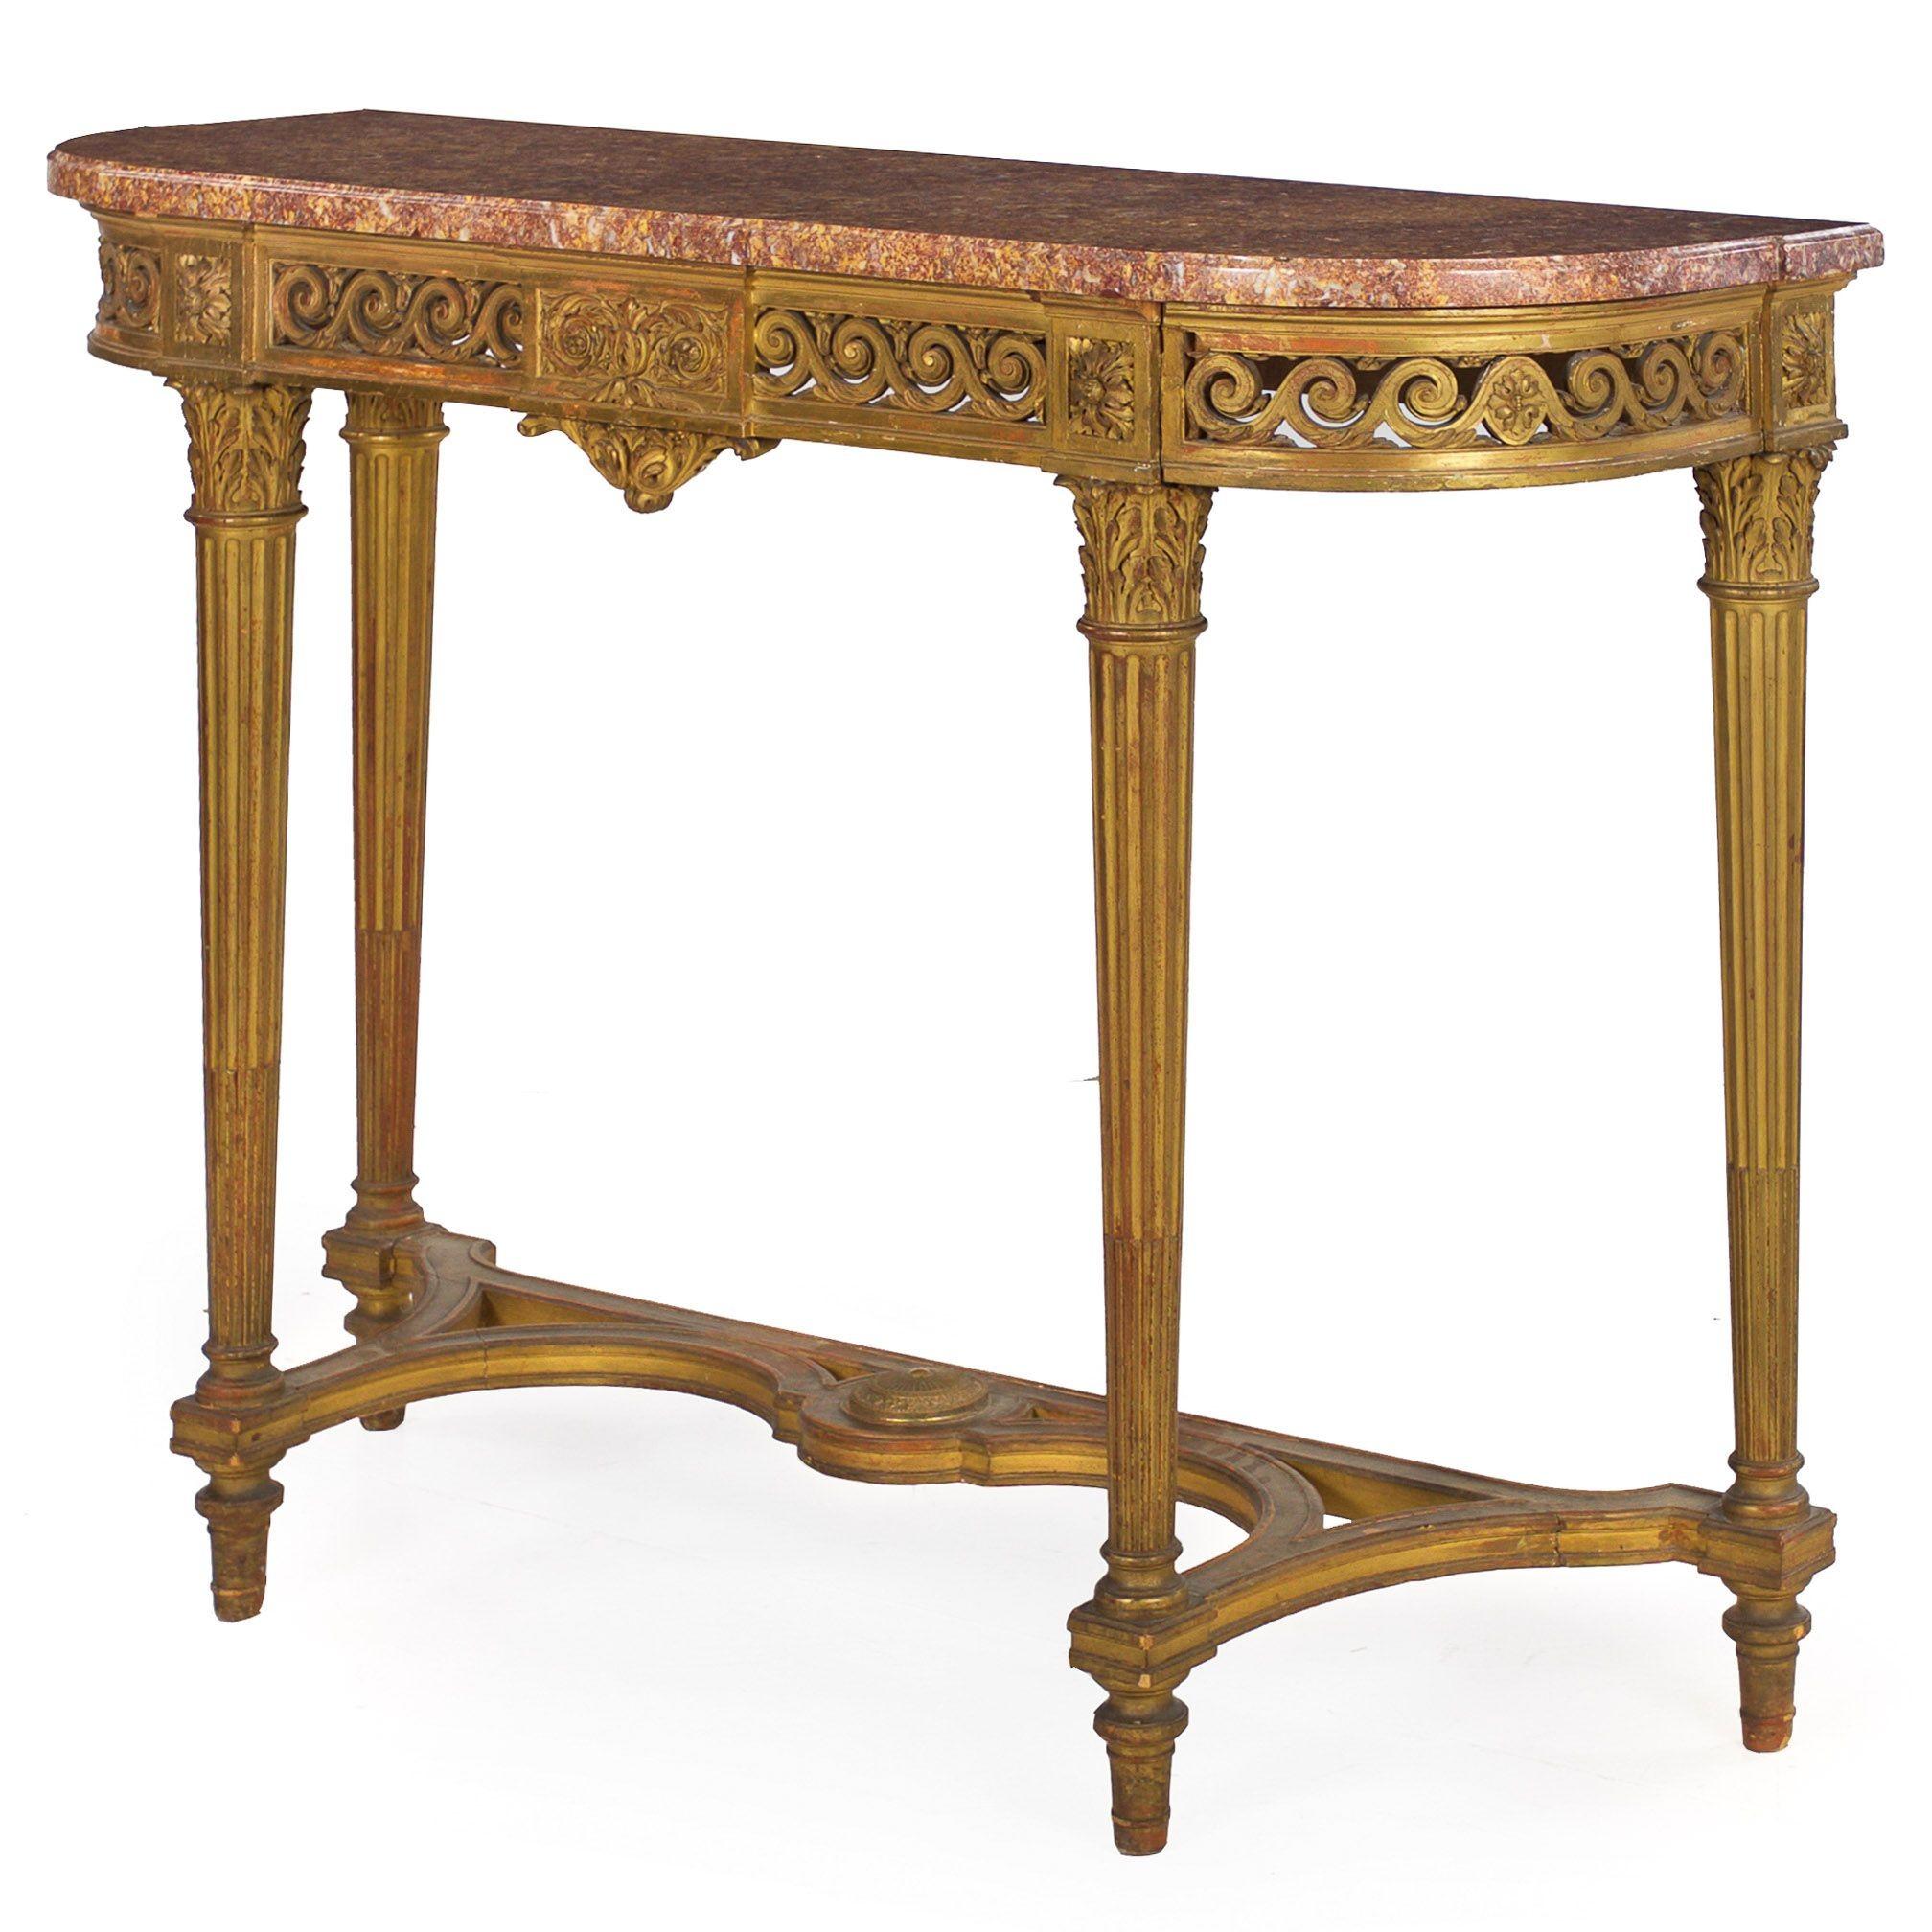 19th Century French Antique Louis XVI Style Giltwood Pier Table Console For Sale 16